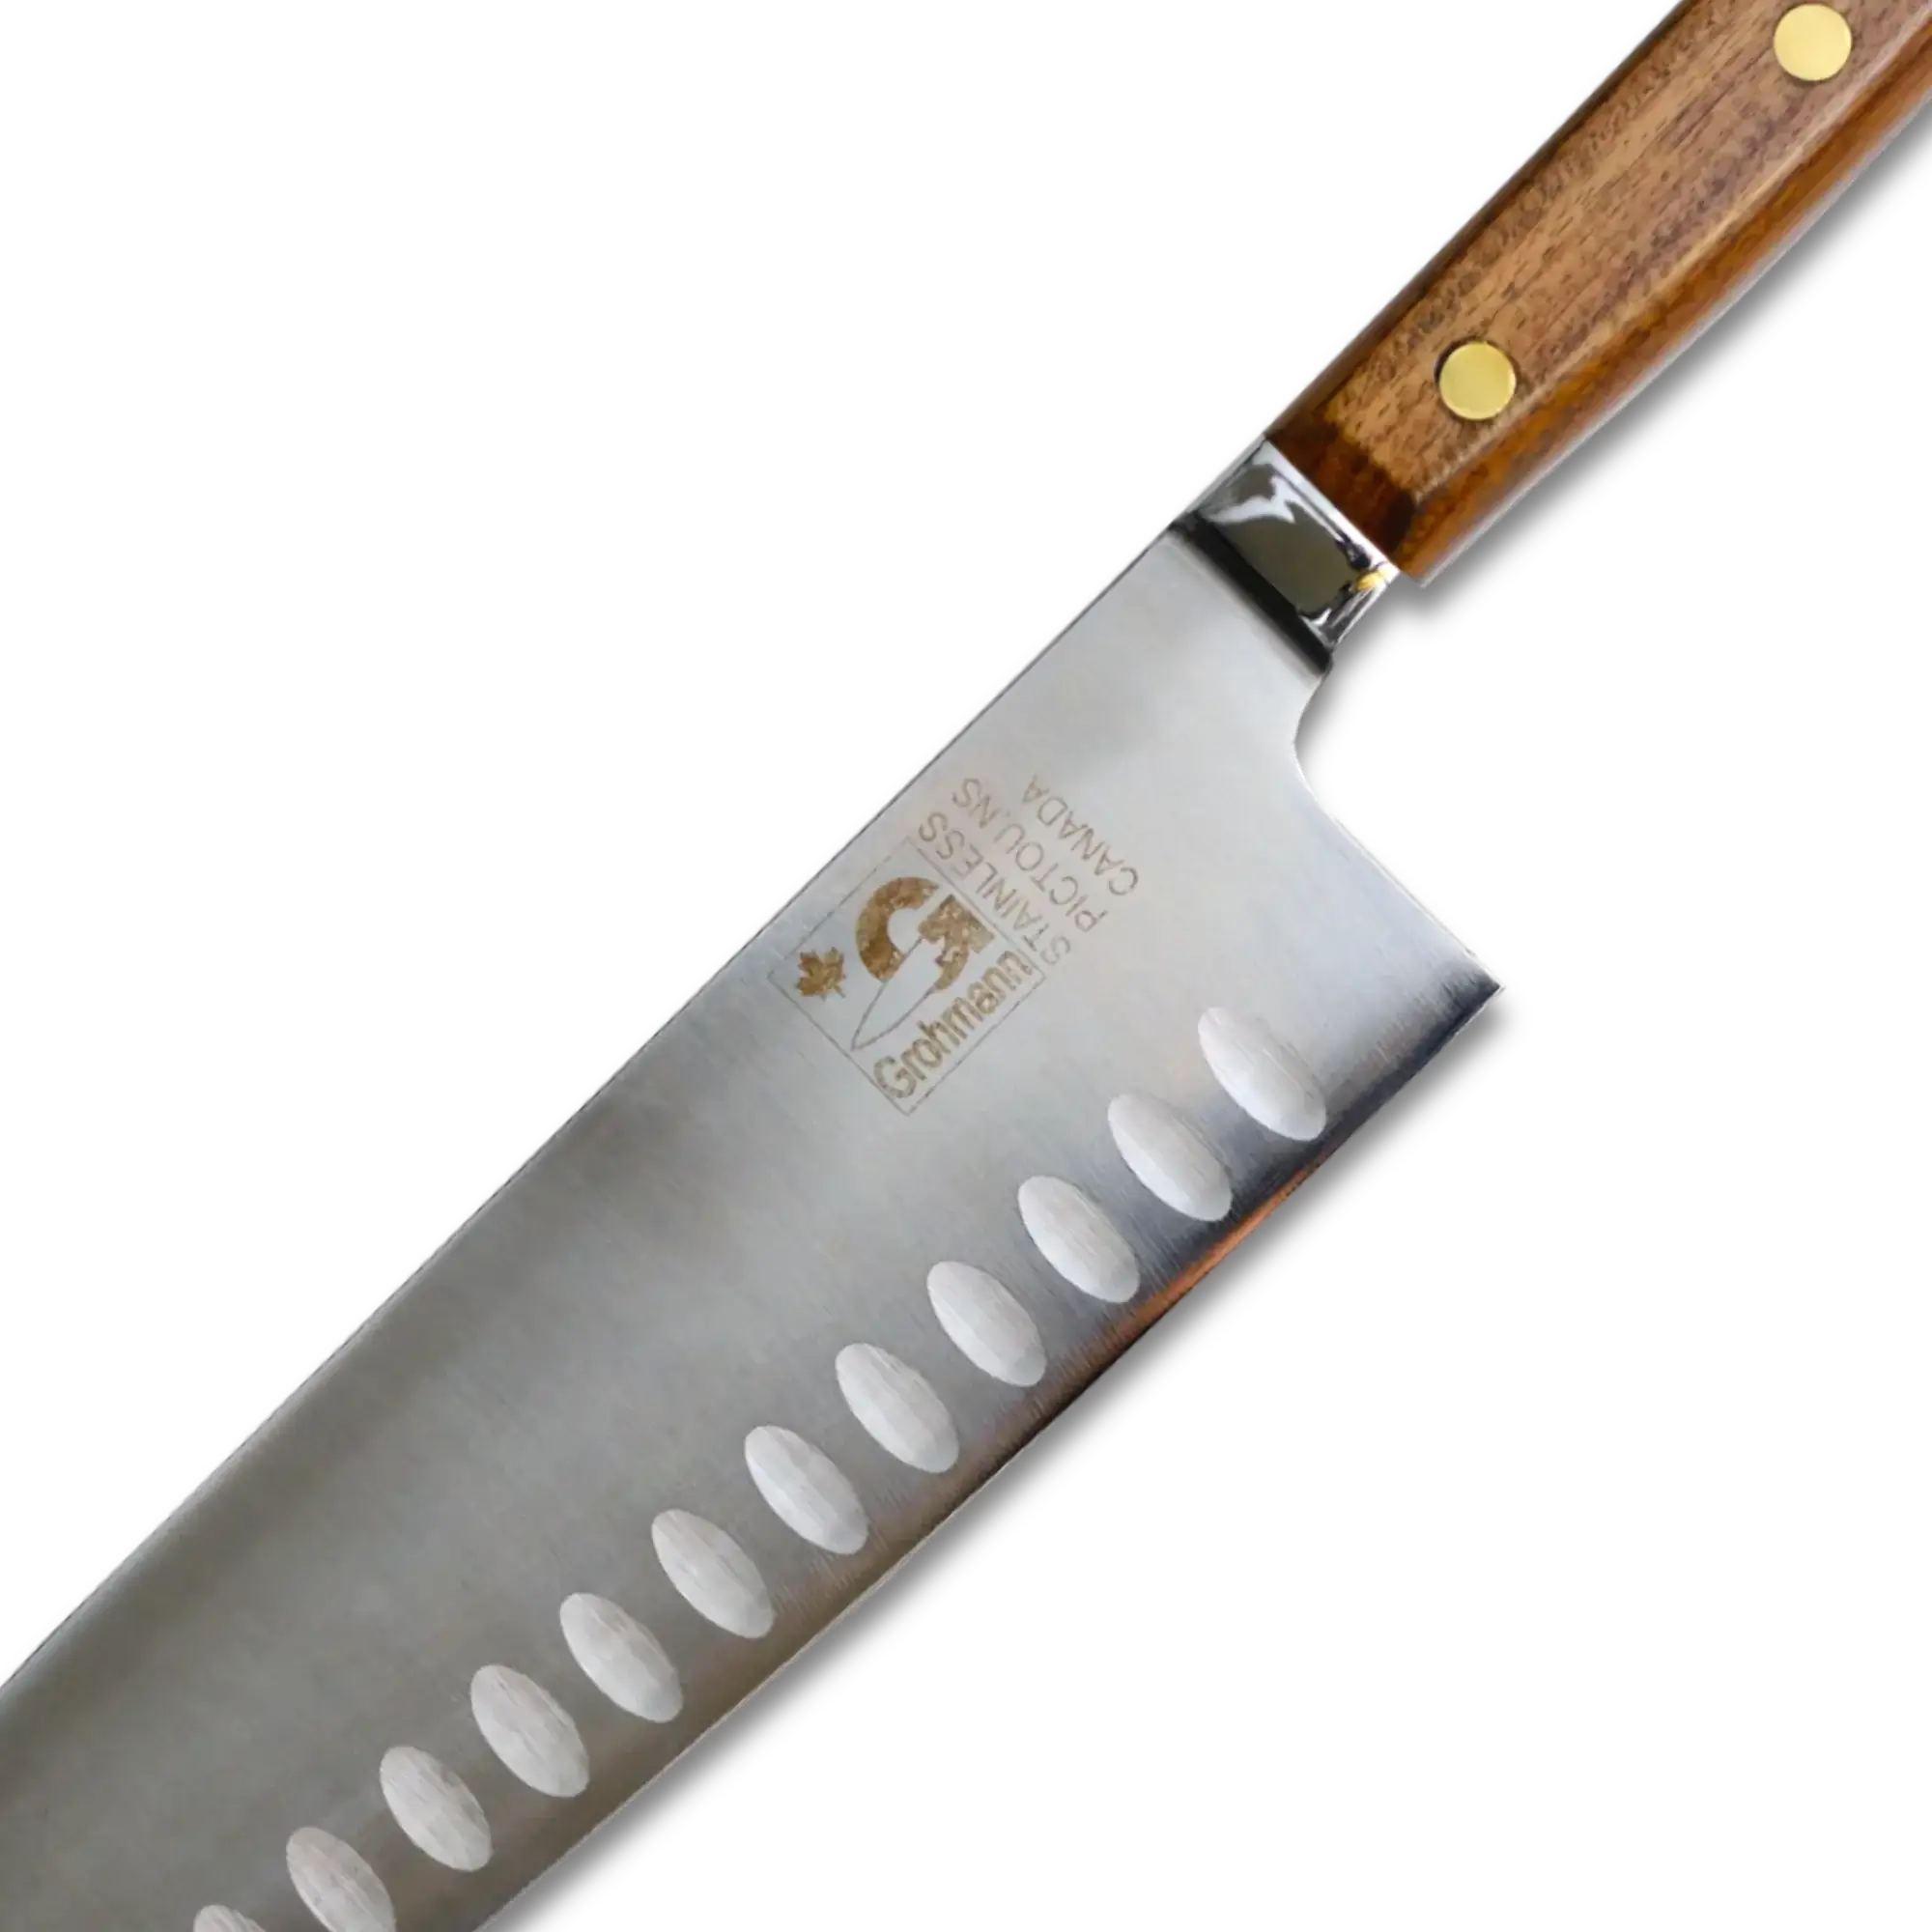 Grohmann Forged Heavy- Santoku Knive 7" Forged Steel - #209FG-7